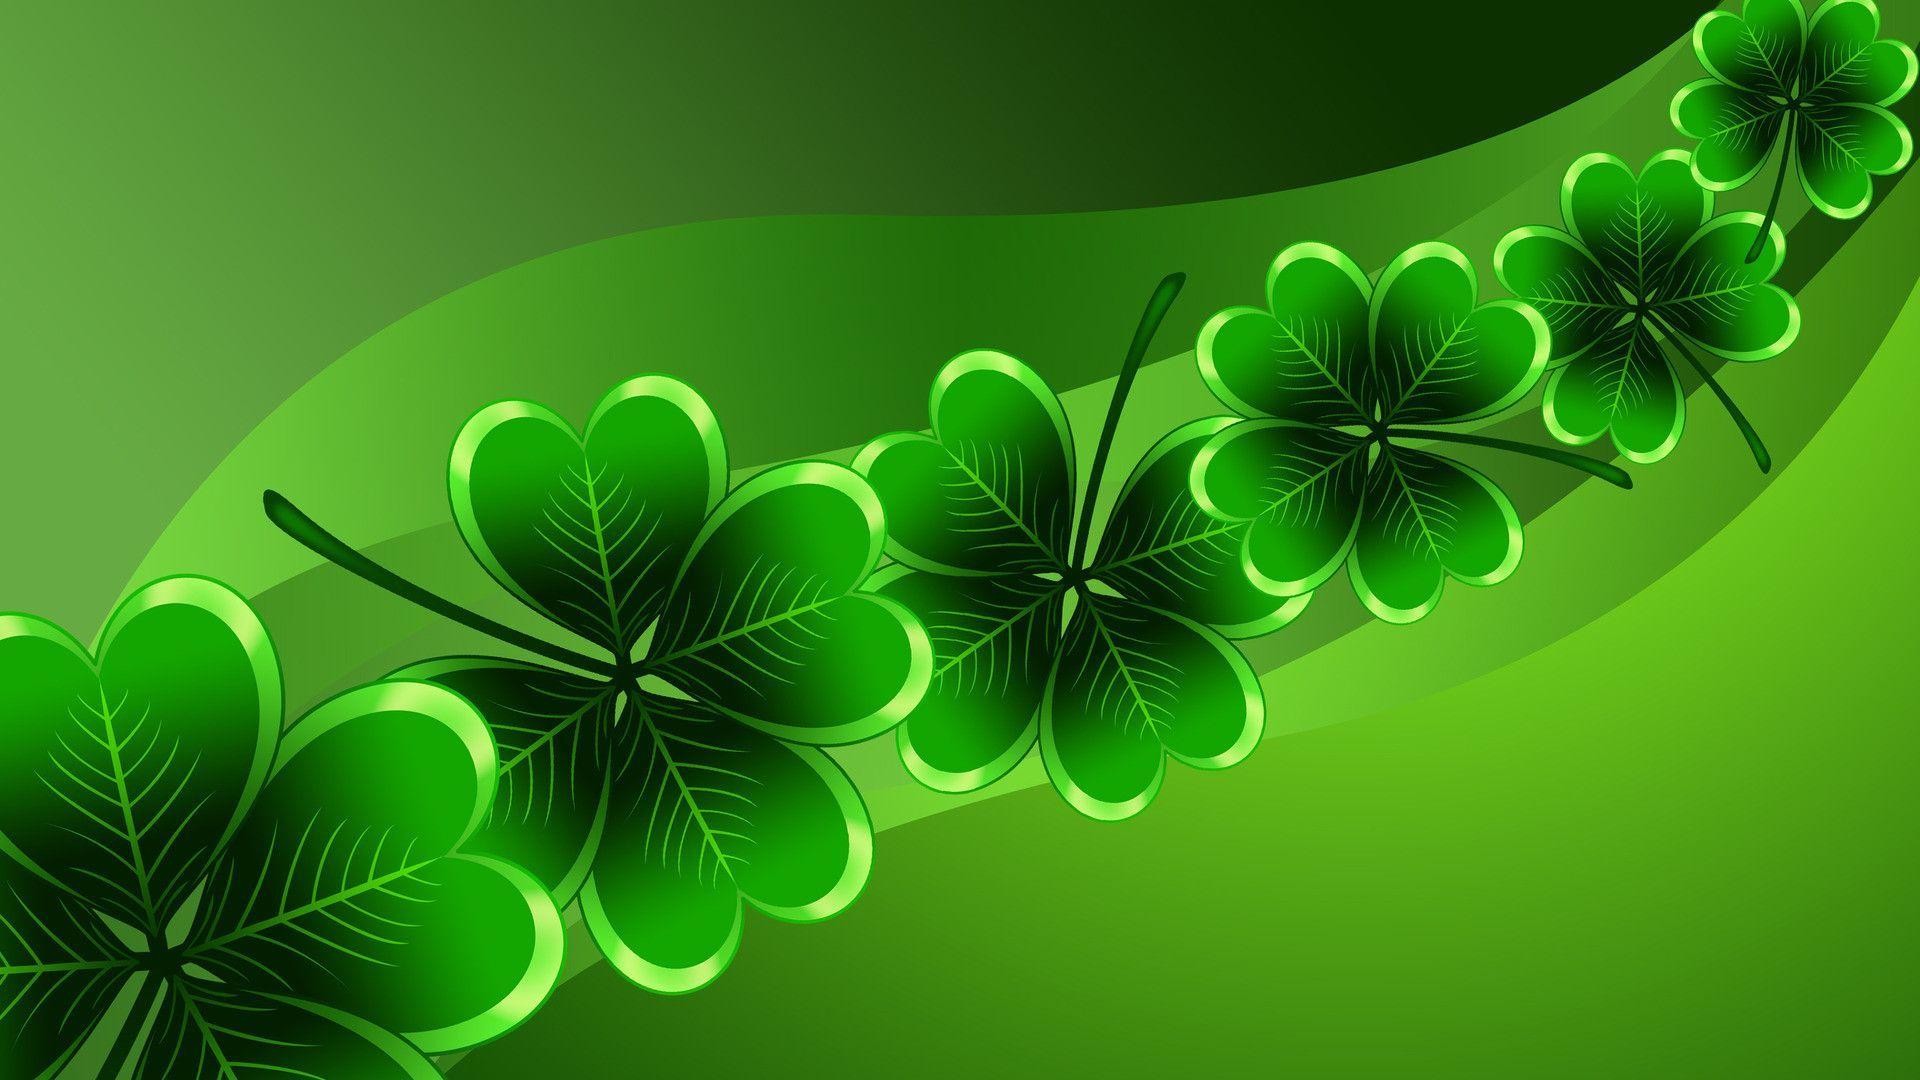 1920x1080 St. Patrick's Day Wallpapers - HD Wallpapers Inn